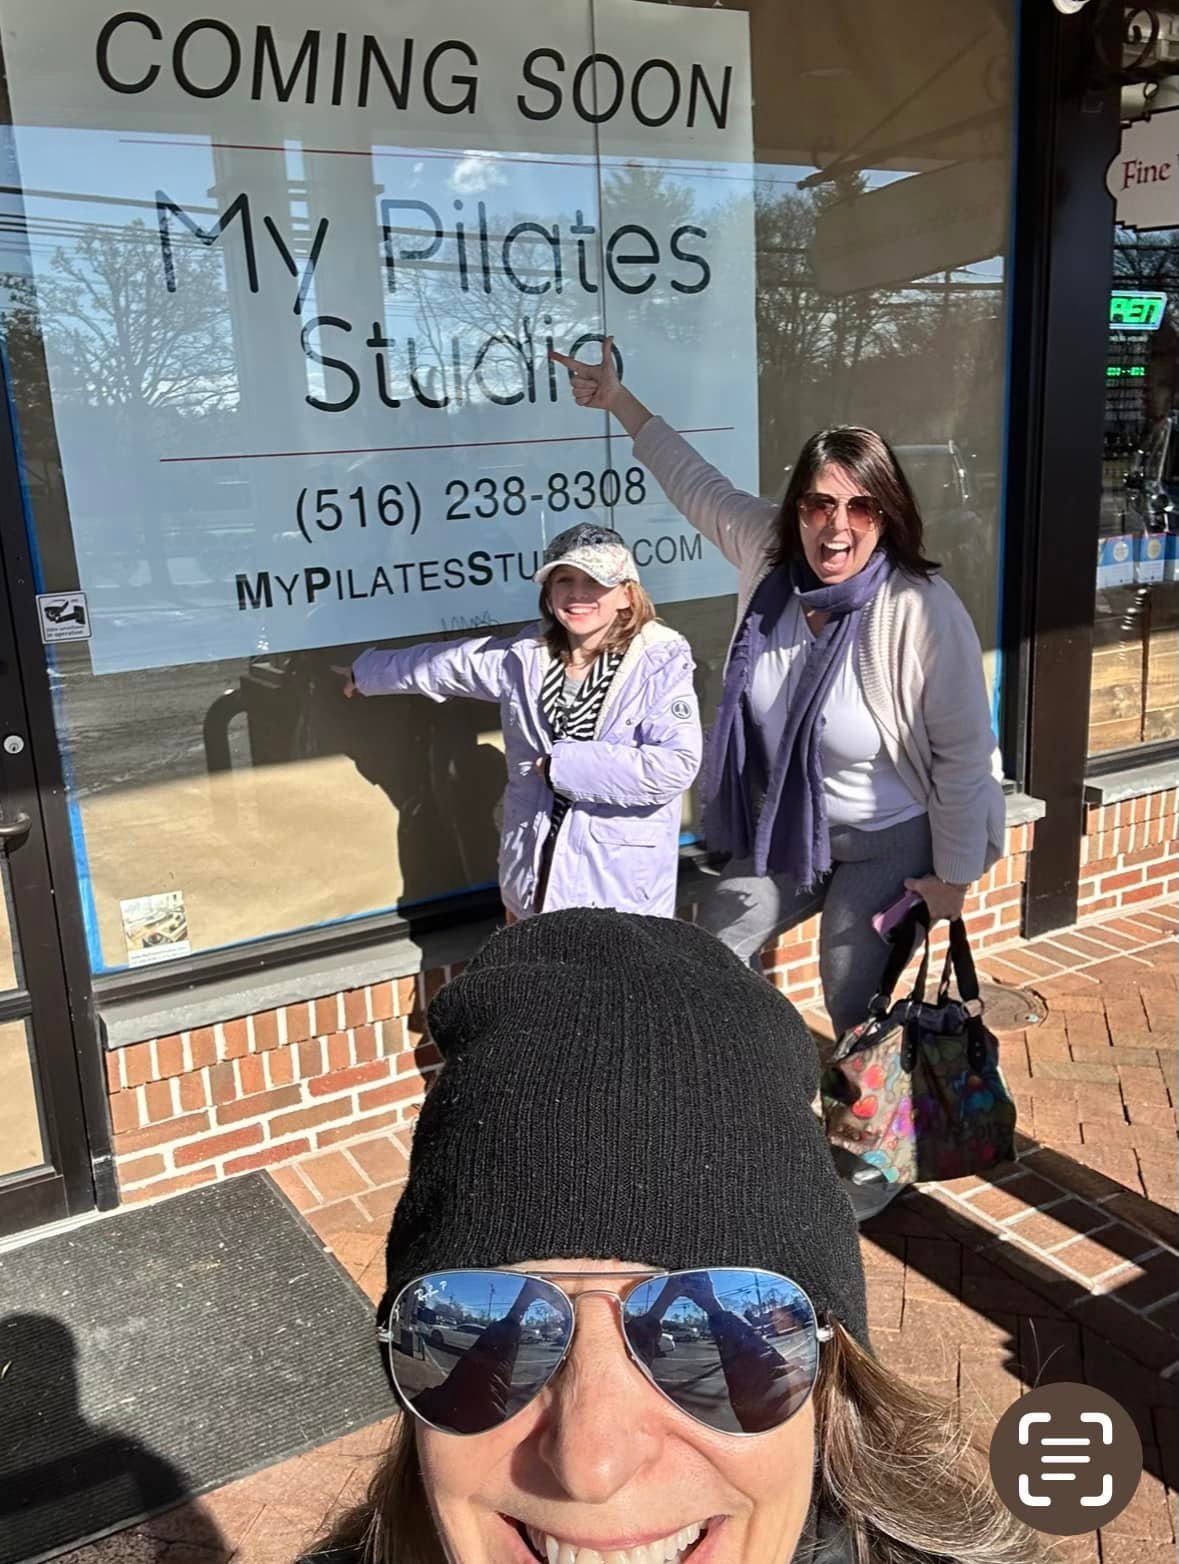 Get ready LI Pilates peeps, master teachers and my besties Nicole Esposito and Melanie Ranaldo at My Pilates Studio are unveiling a brand new gorgeous location in East Norwich and you are invited to be one of the first to check it out (and reap the b